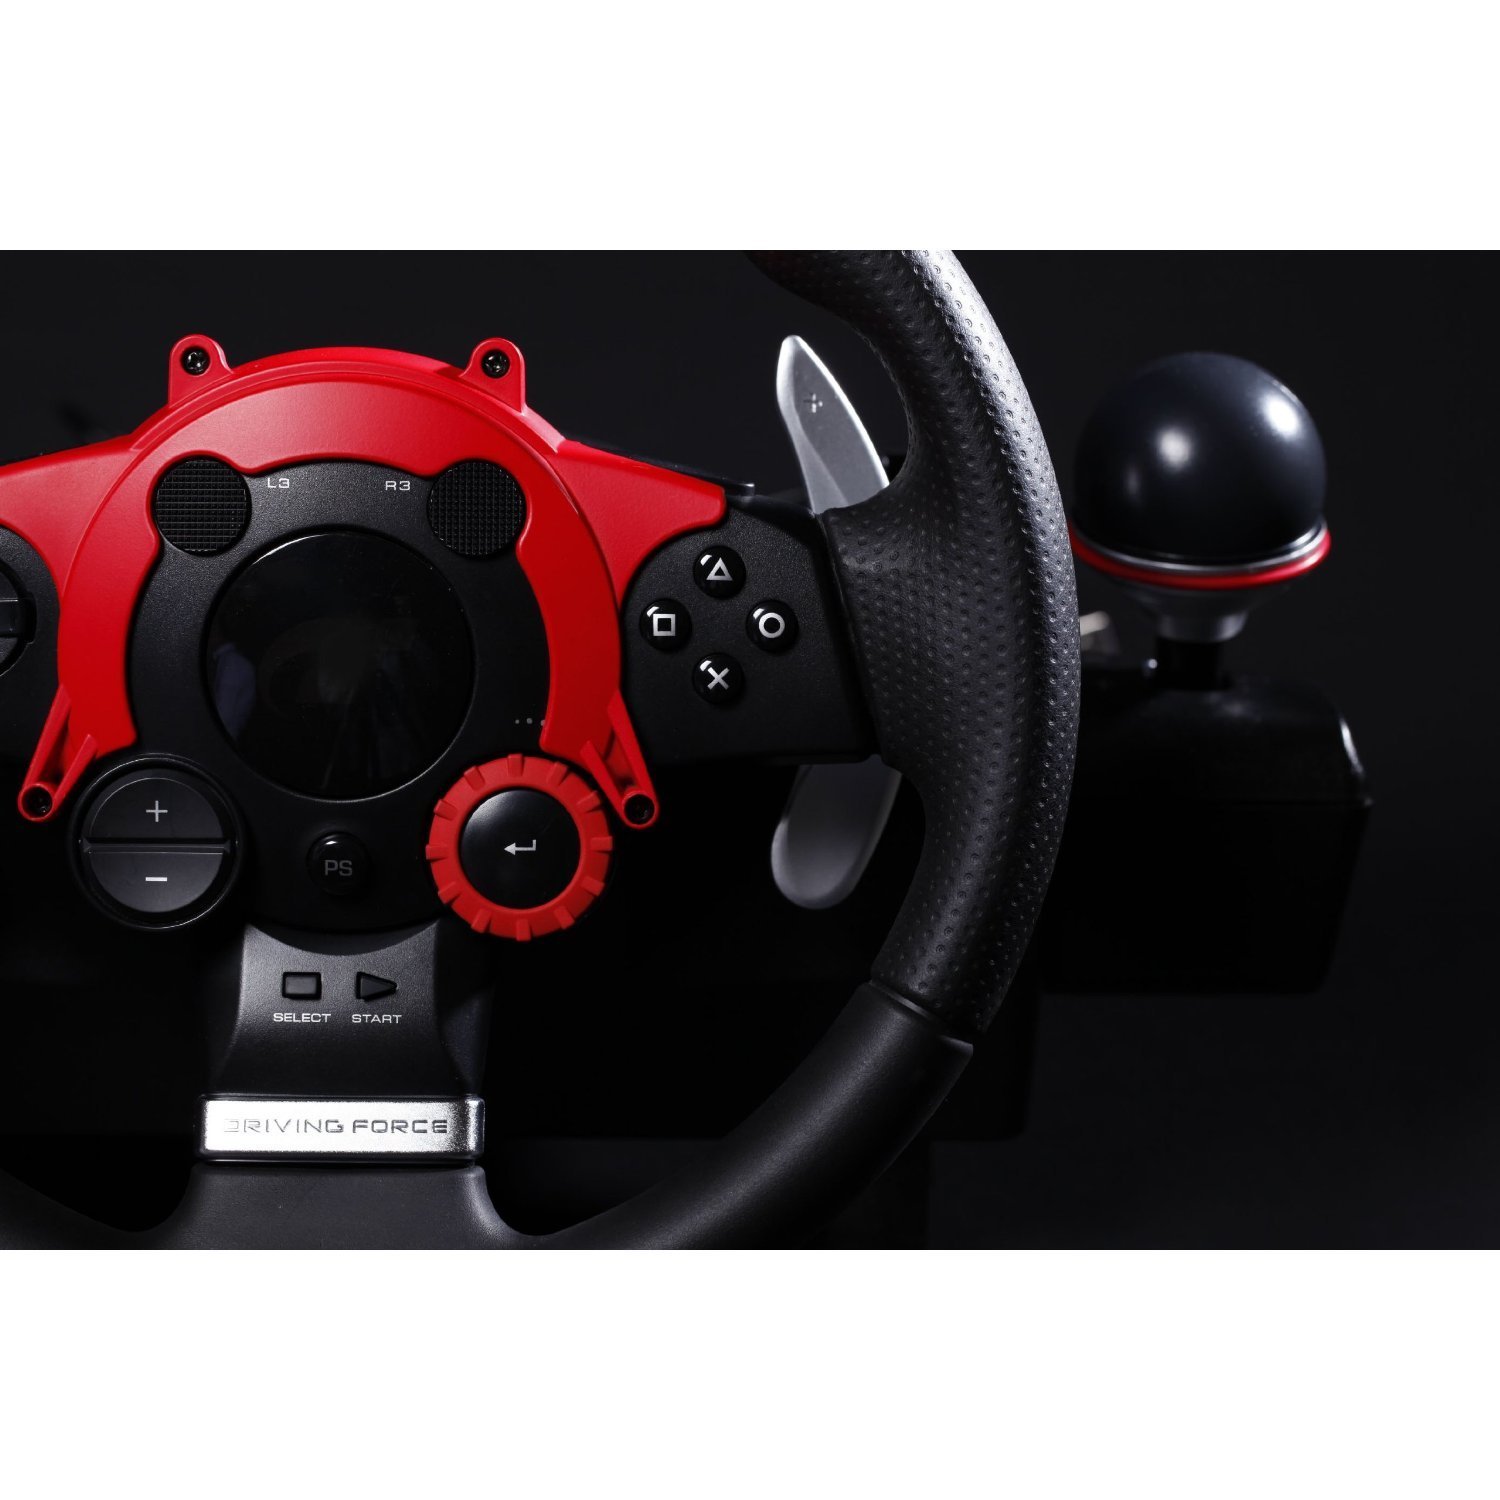 Paddle Shift for Logitech Driving Force Gt